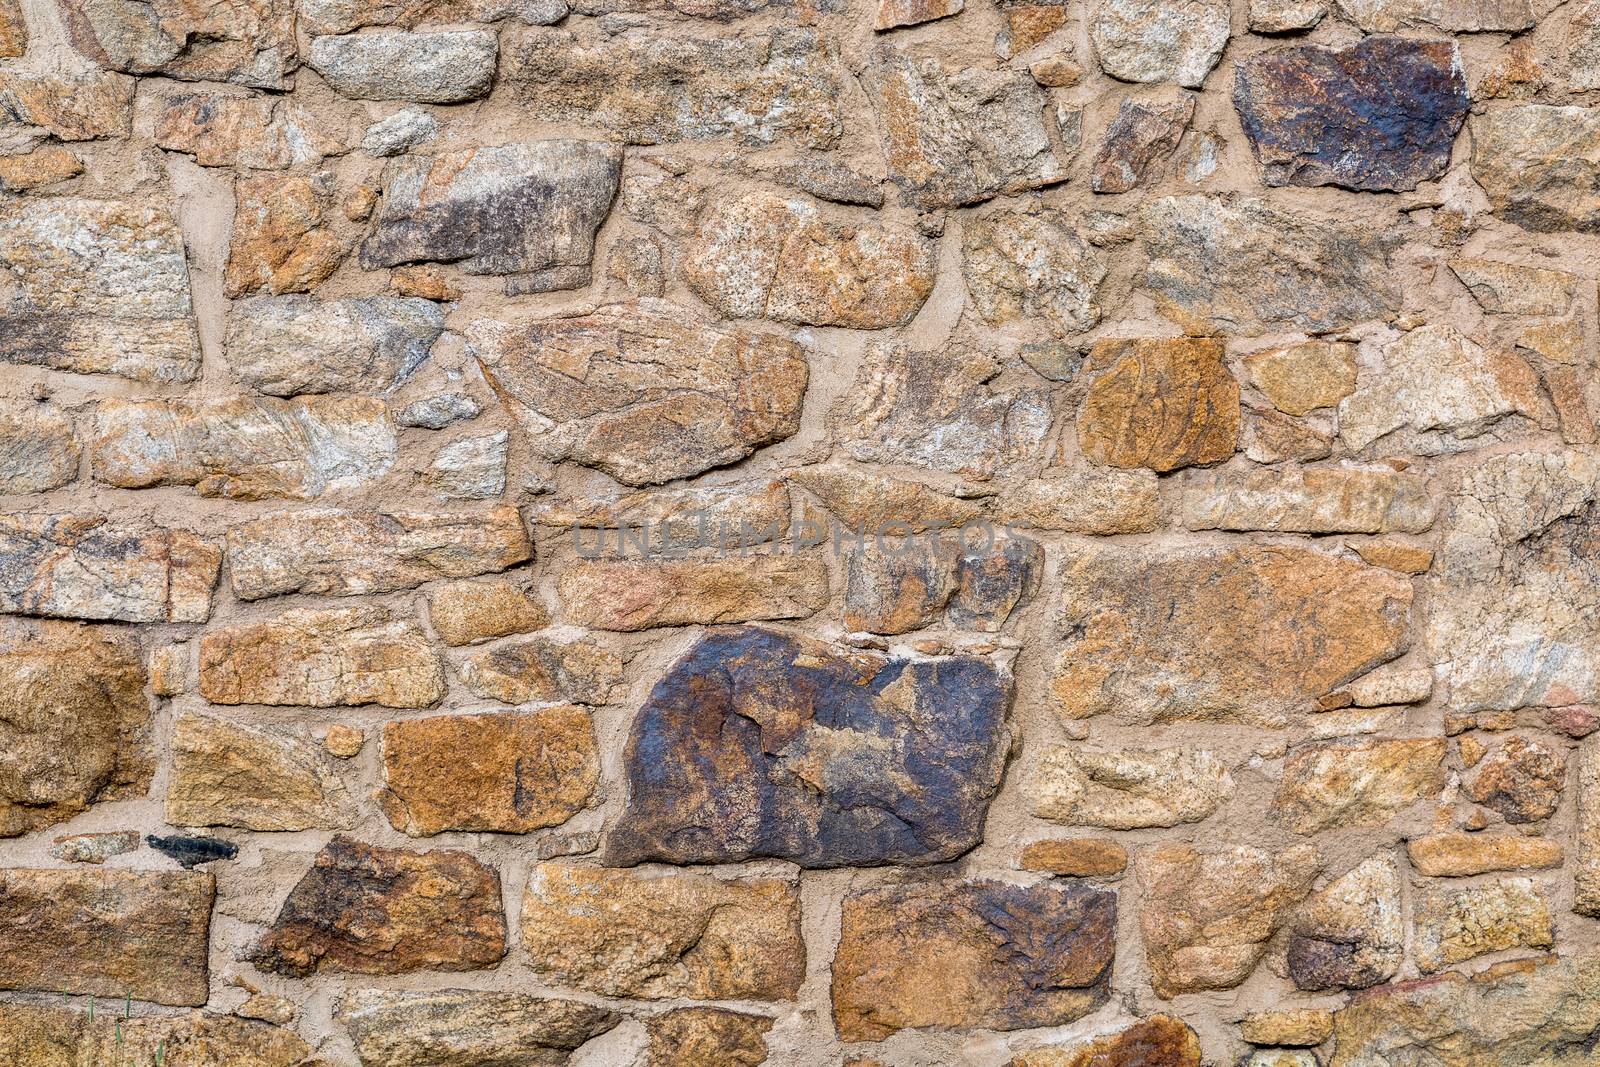 background and texture of old stone wall built with irregular sandstone blocks